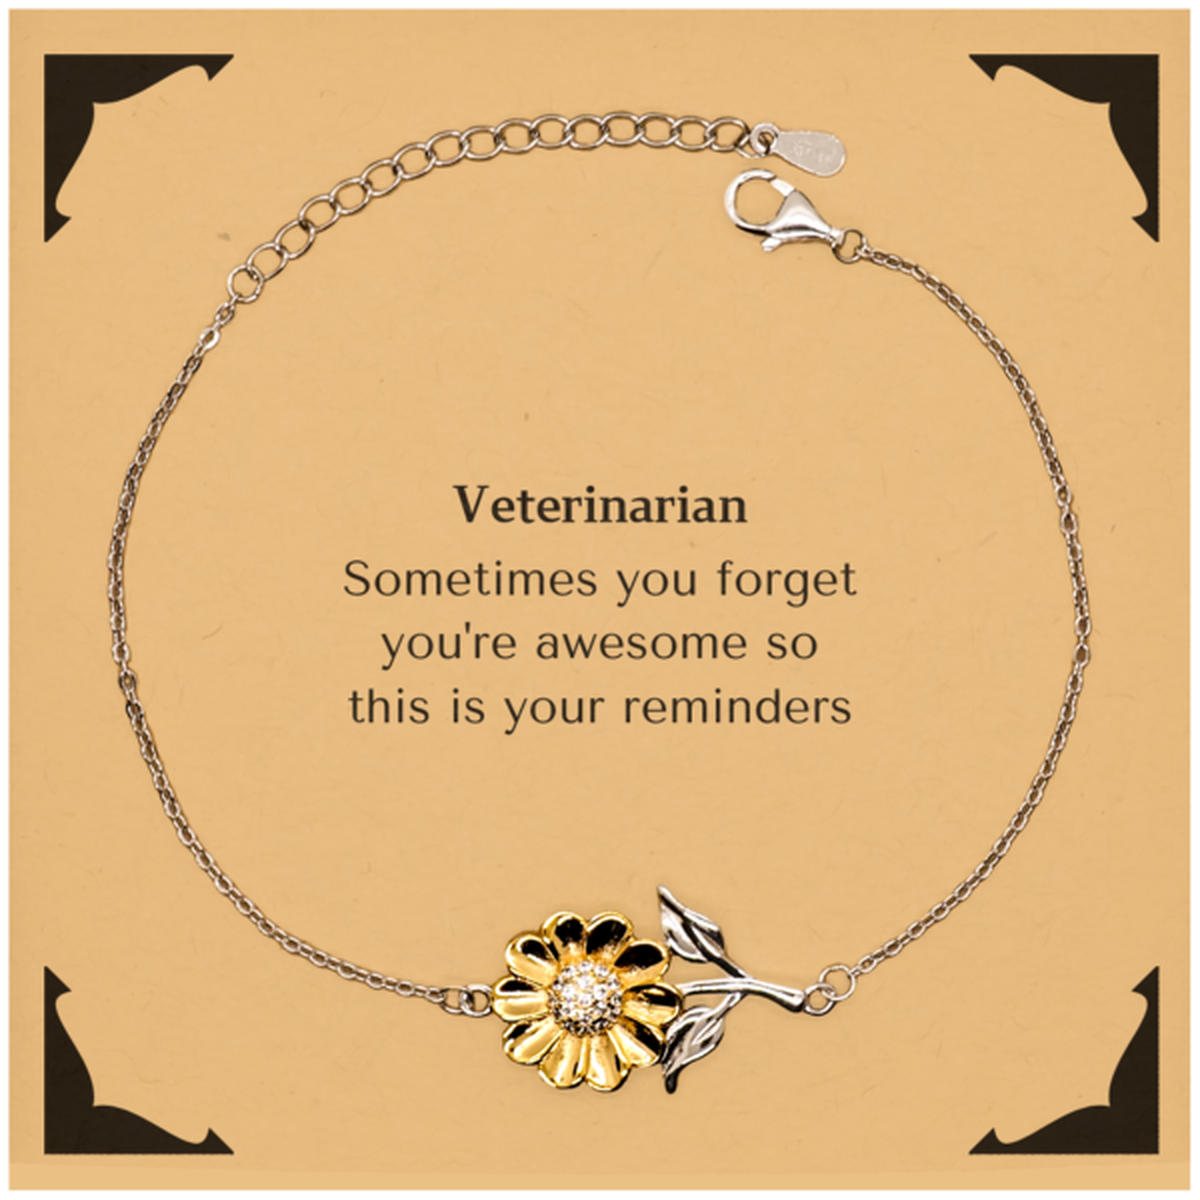 Sentimental Veterinarian Sunflower Bracelet, Veterinarian Sometimes you forget you're awesome so this is your reminders, Graduation Christmas Birthday Gifts for Veterinarian, Men, Women, Coworkers